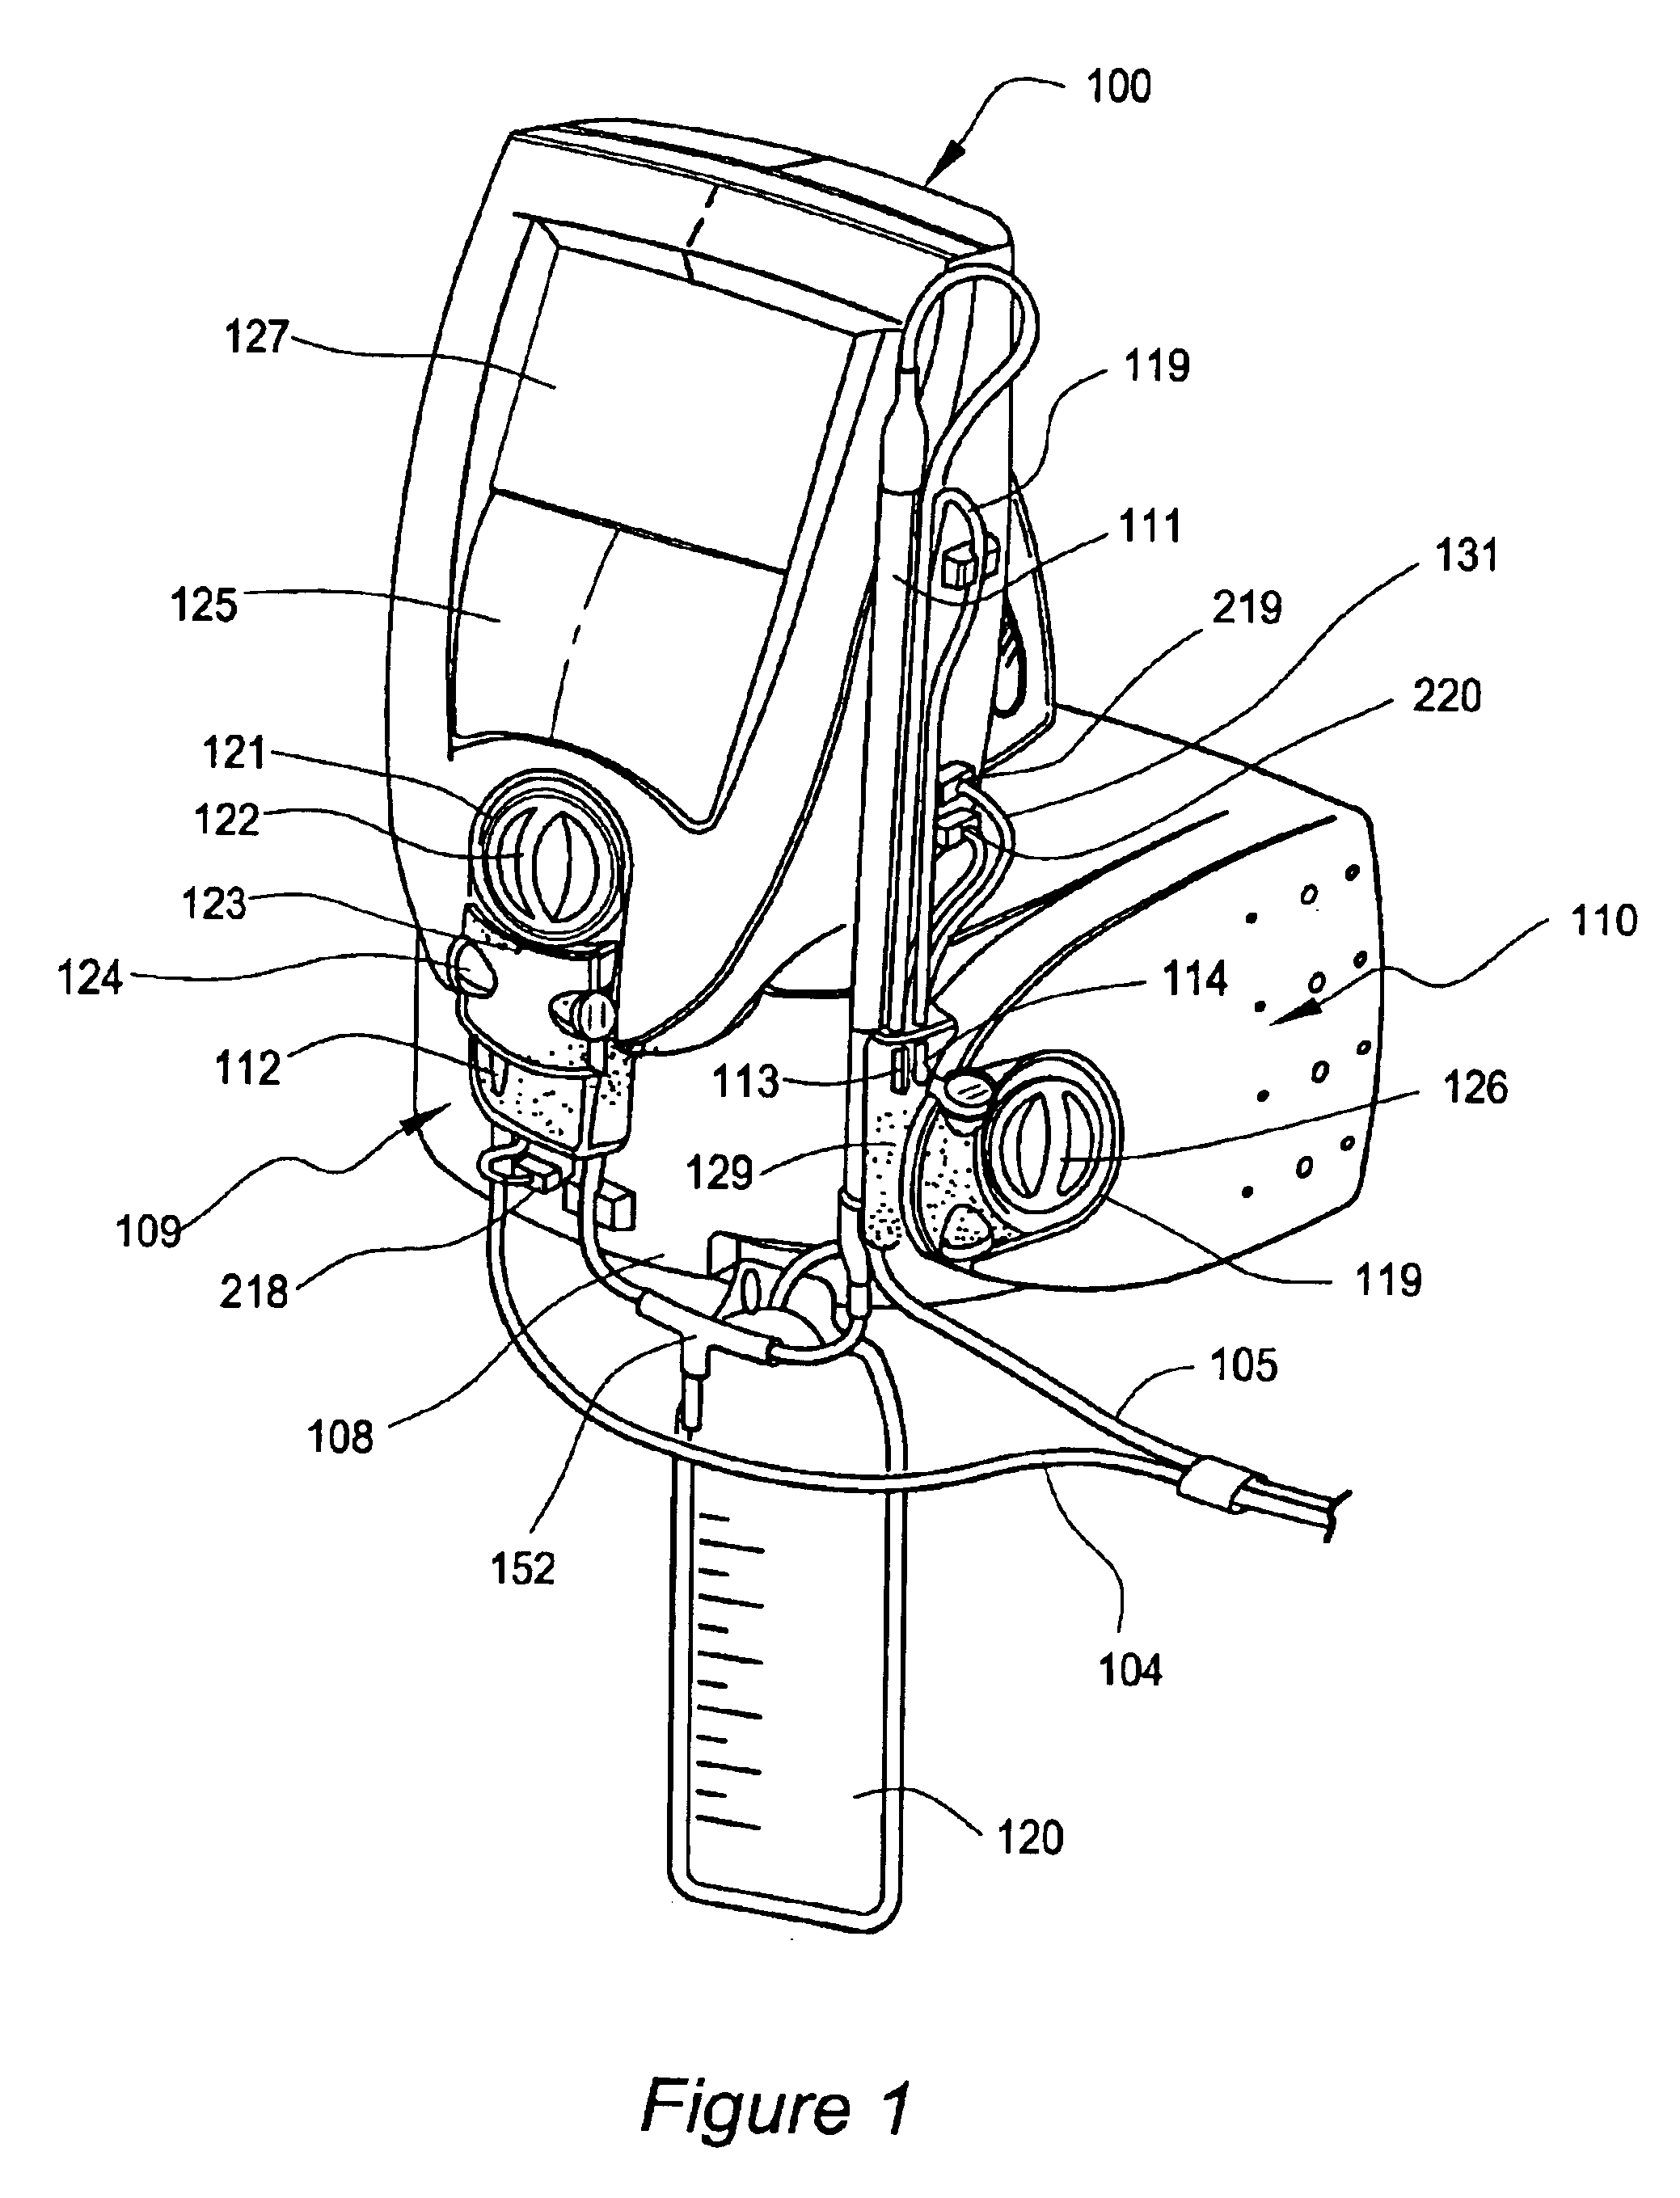 User interface for blood treatment device